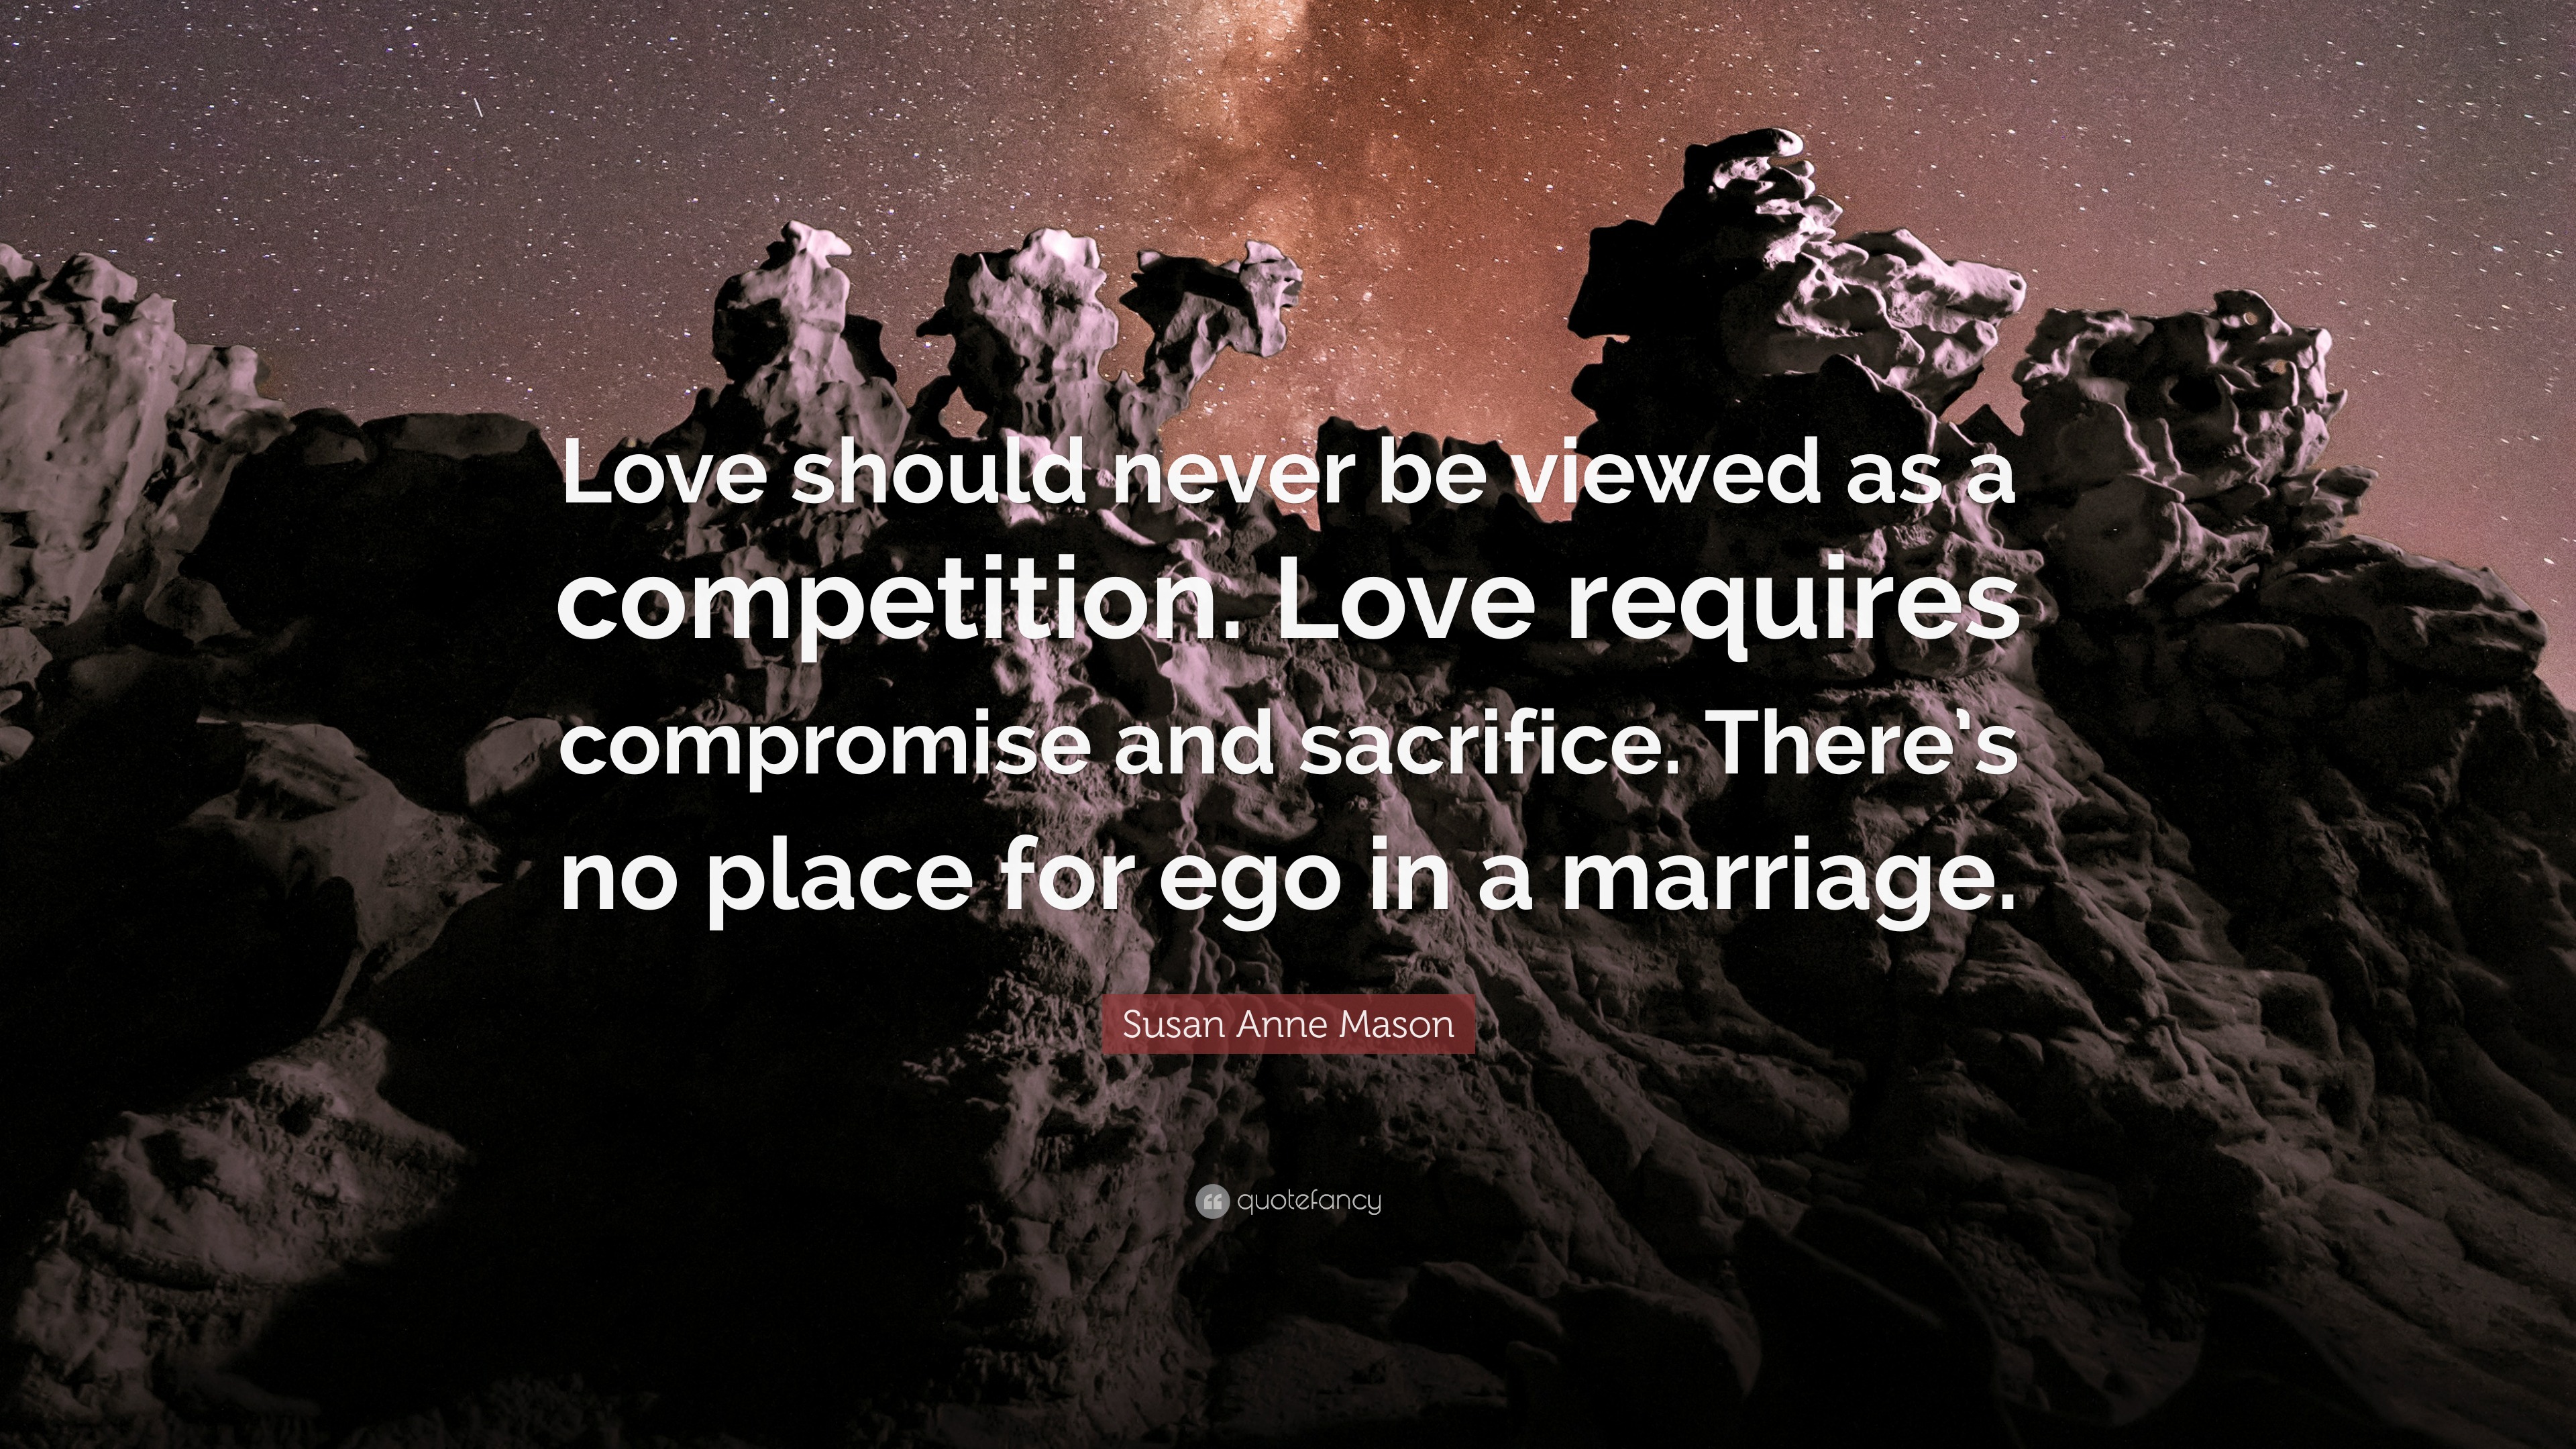 Does Love Involve Sacrifice or Compromise?